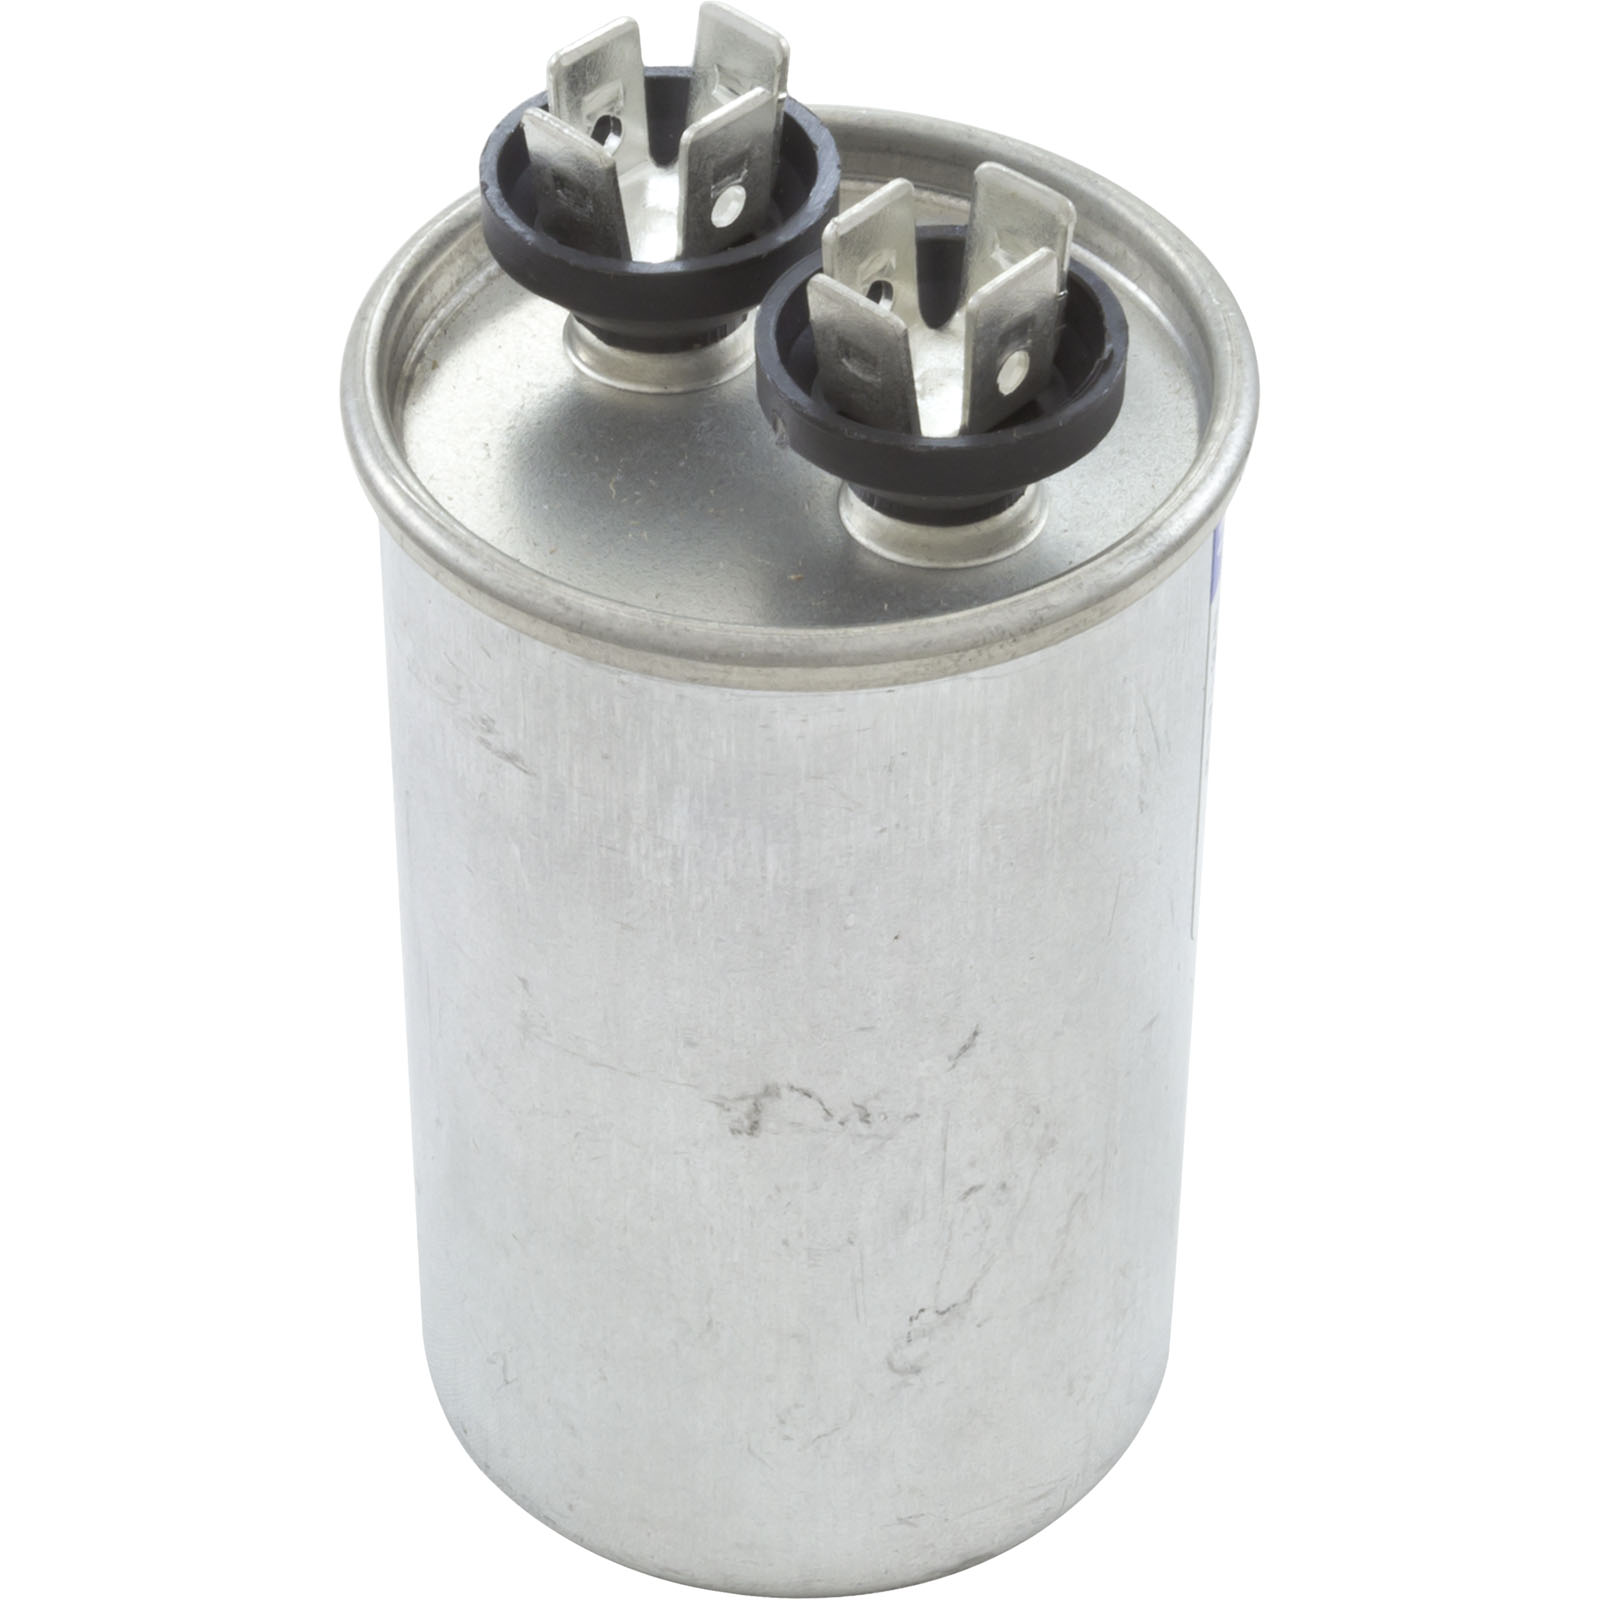 Picture of 319-0027 Run Capacitor 30 MFD 370v